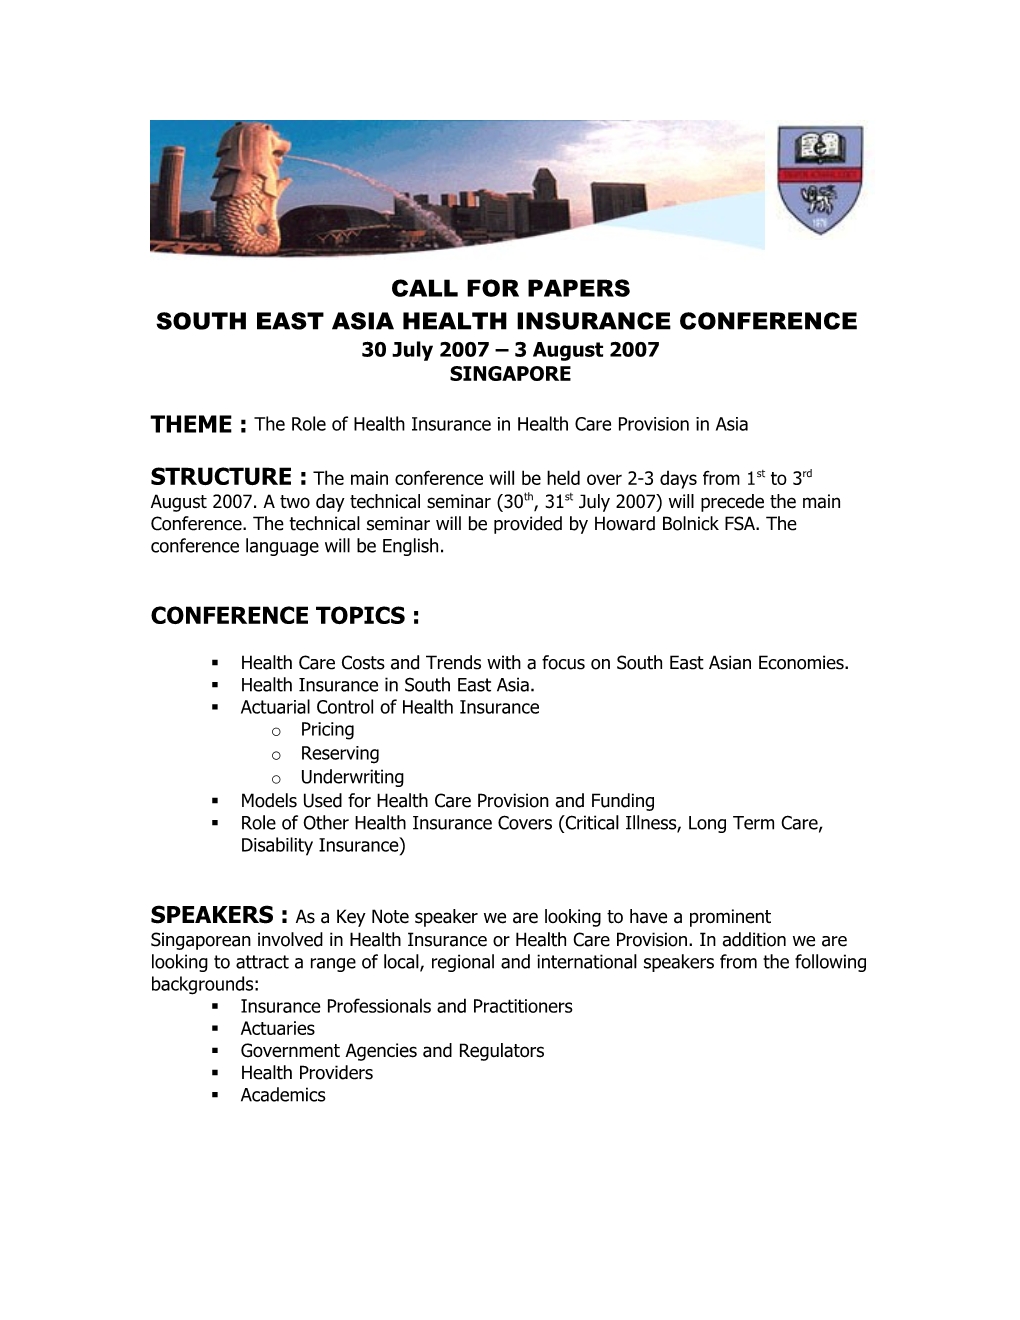 South East Asia Health Insurance Conference